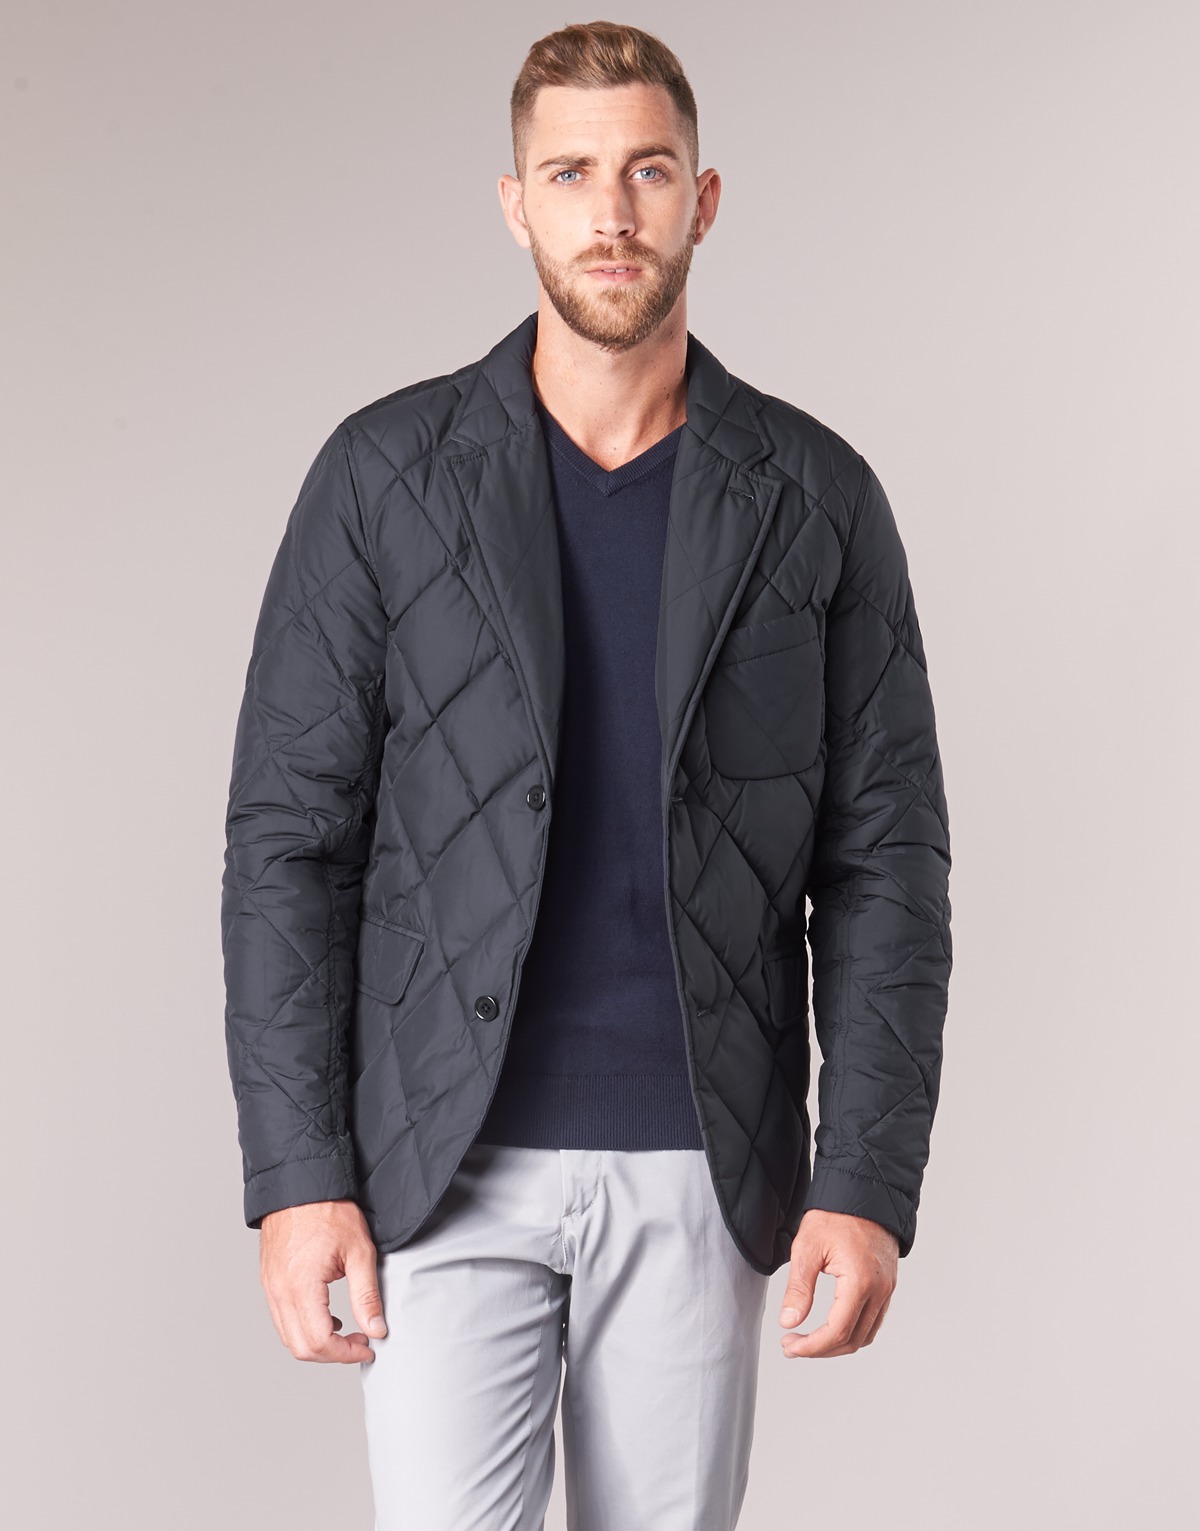 Vicomte A. Marine ODIN QUILTED BLAZER yLfBFOVD